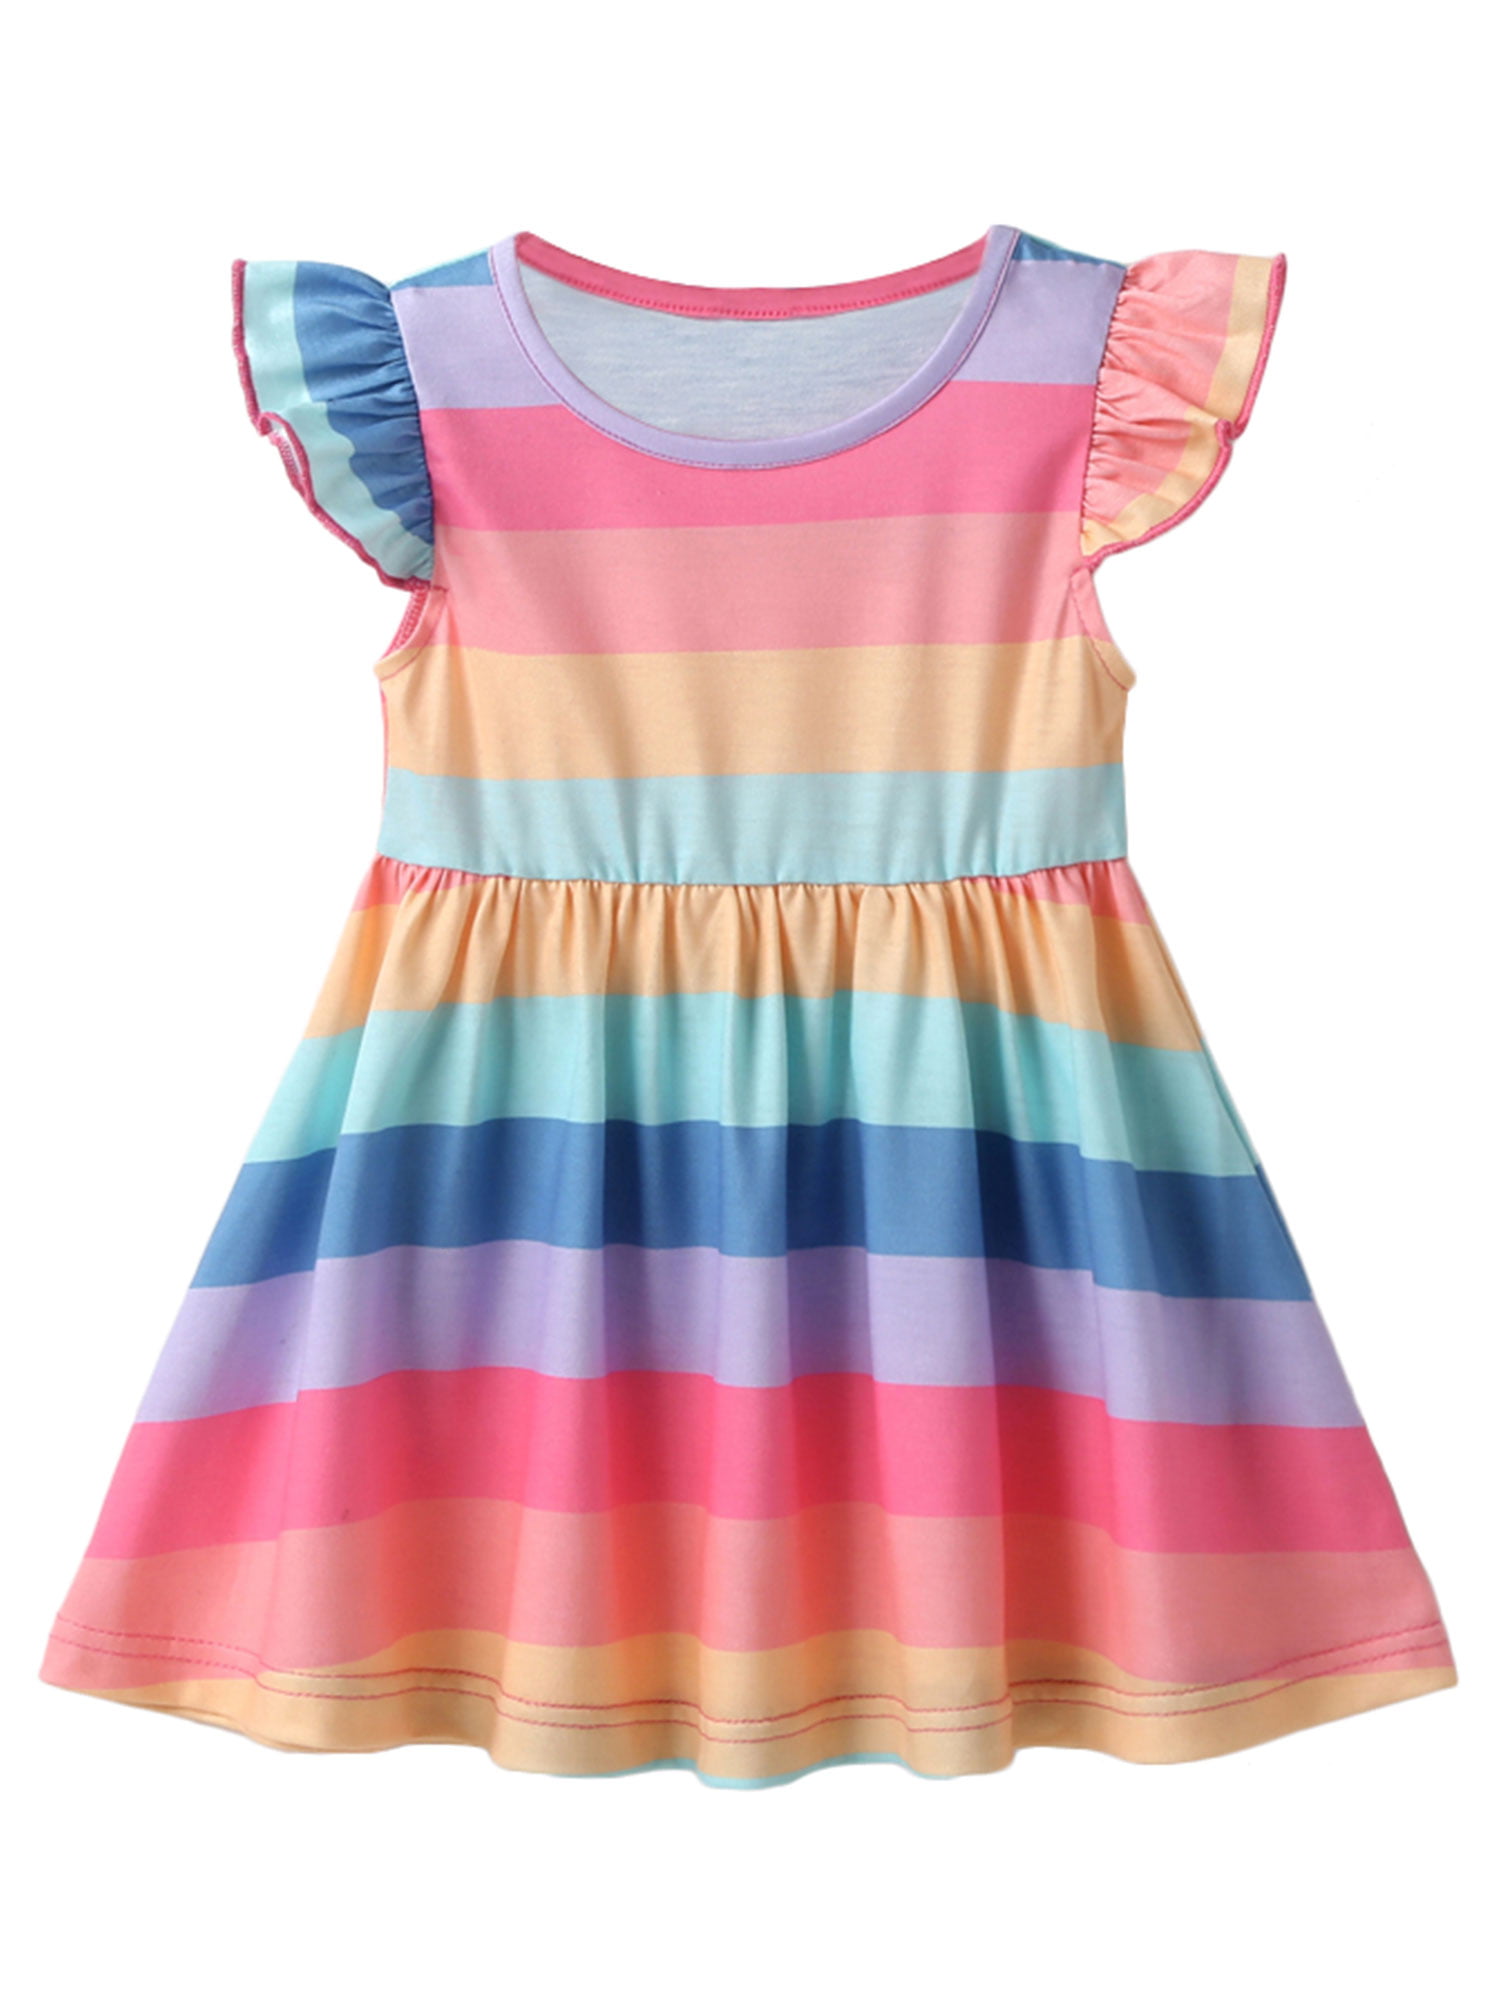 Girls Clothes Children Clothing Summer Party Kids Dresses for Girls Toddler Girls Casual Dress 3T to 8T,Multi of style Cute Girls dress